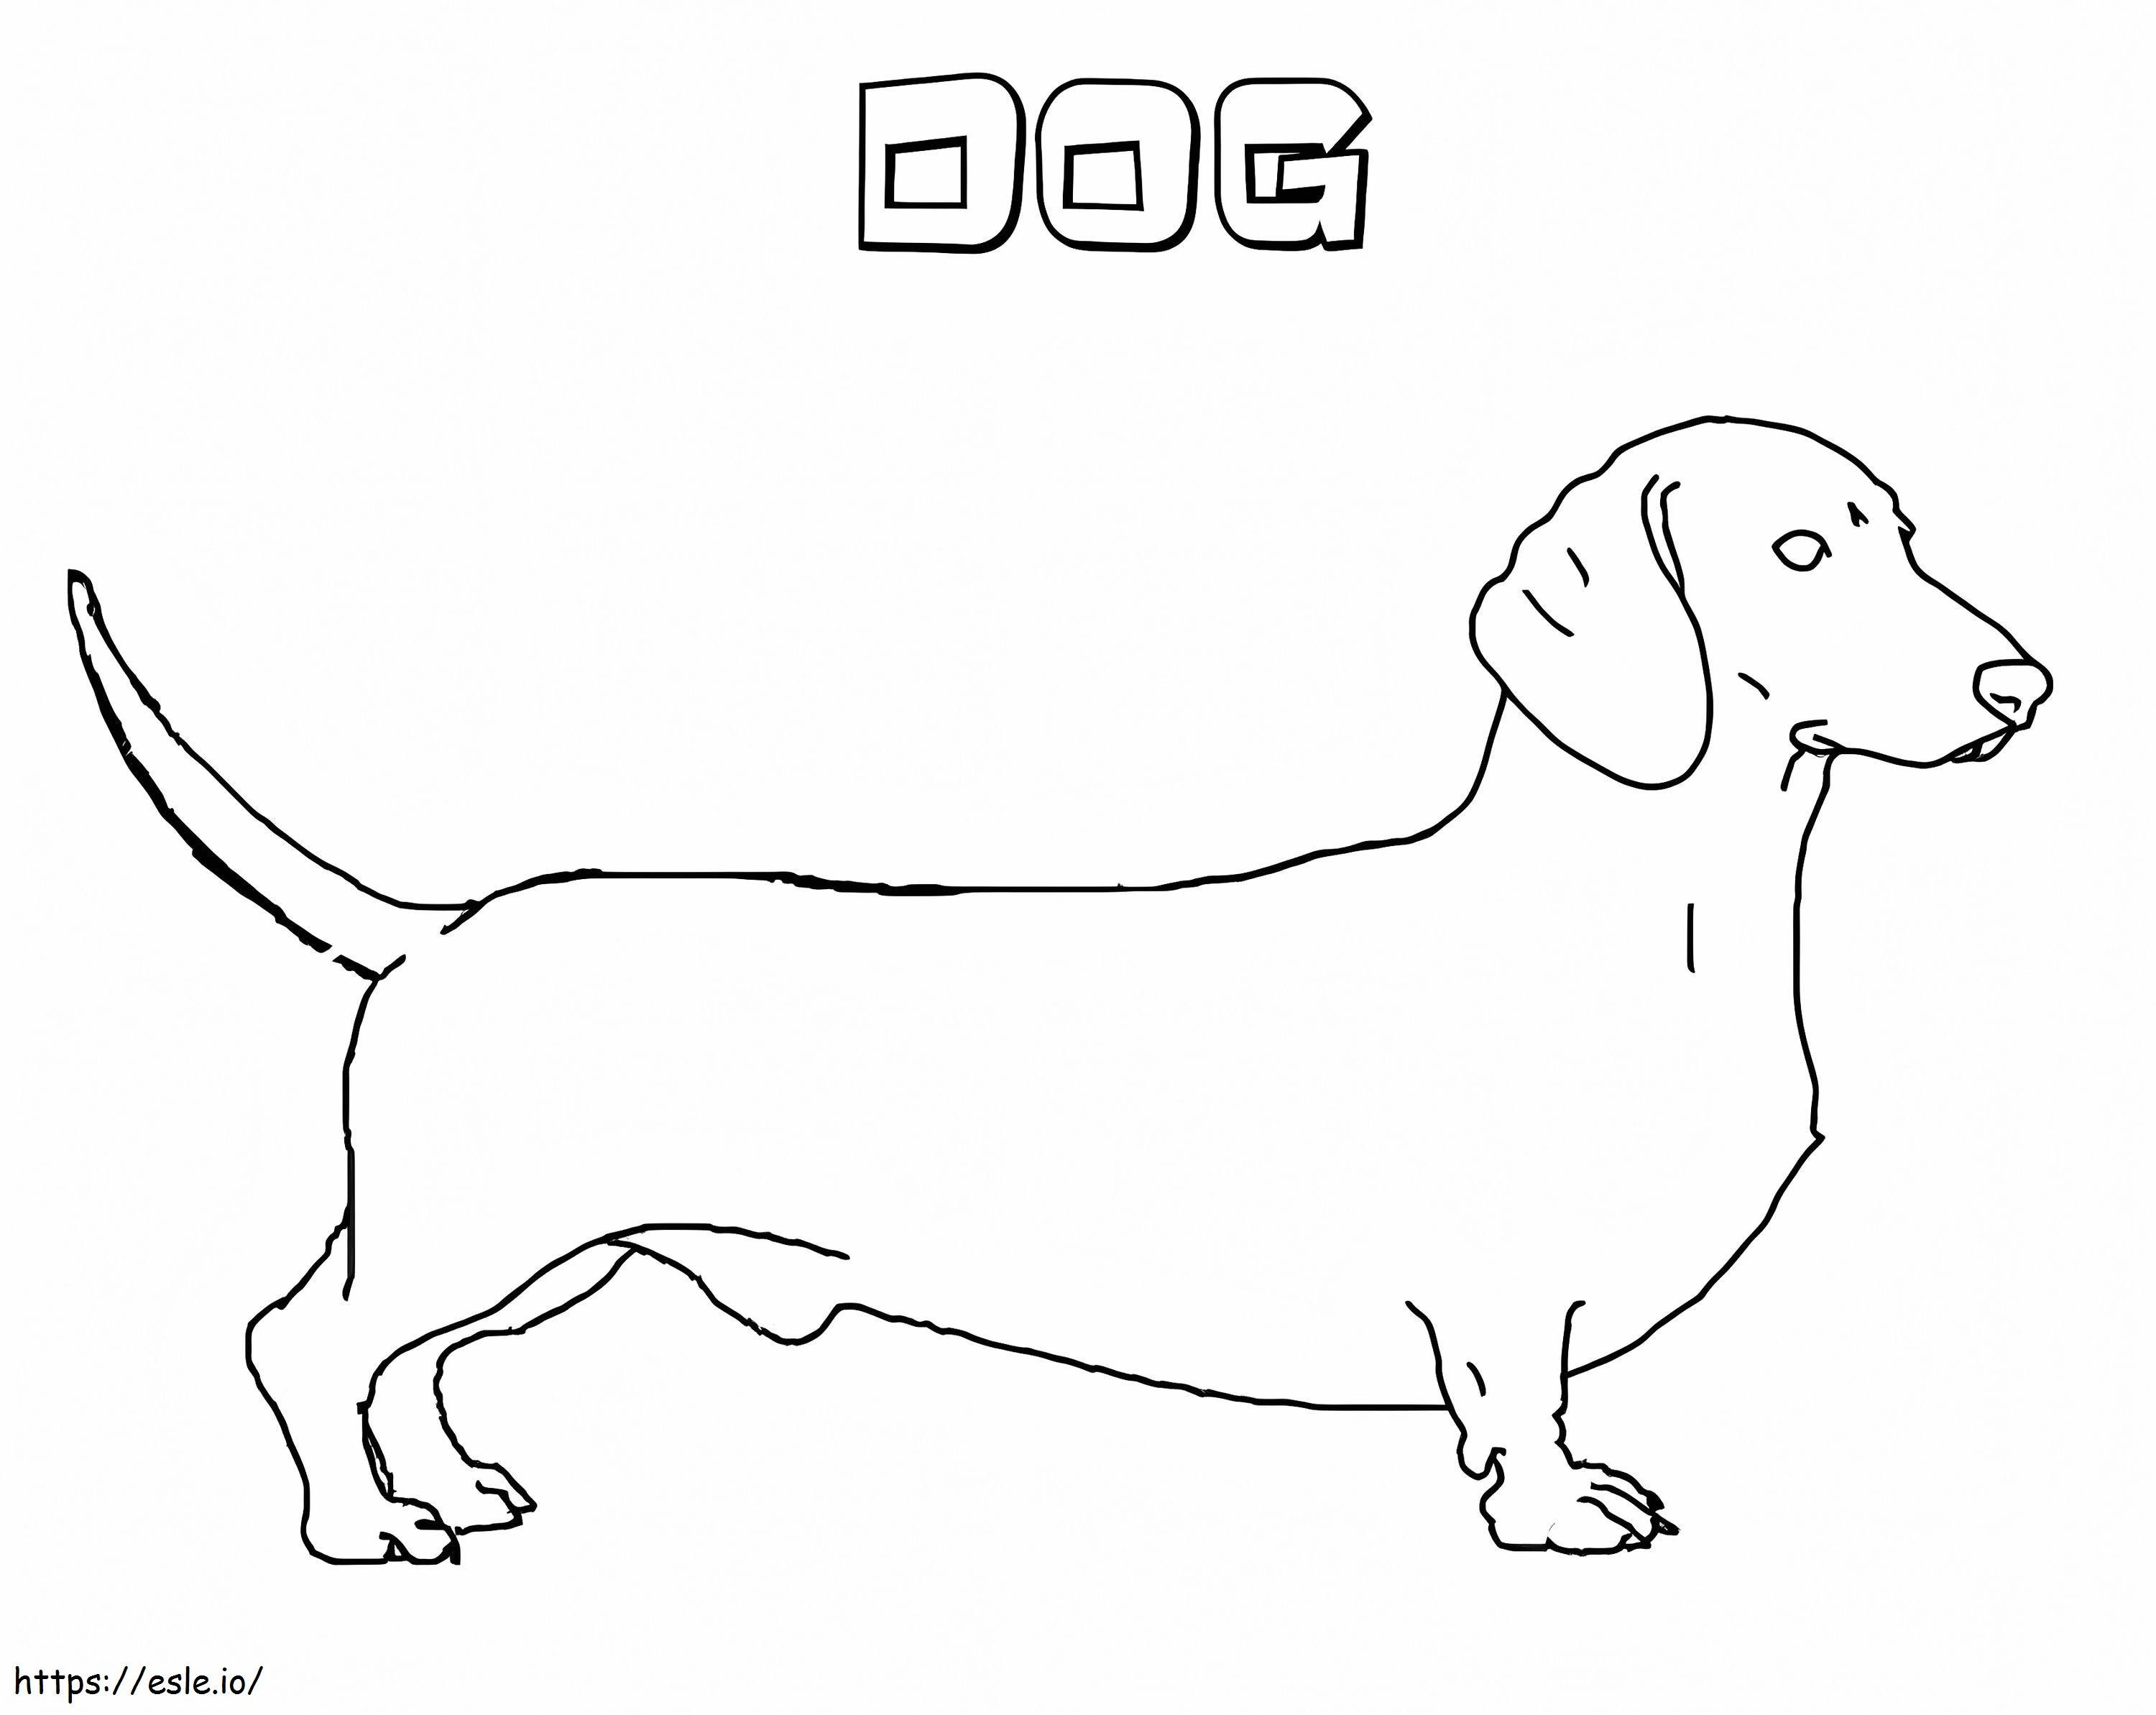 Dachshund Dog 1 coloring page